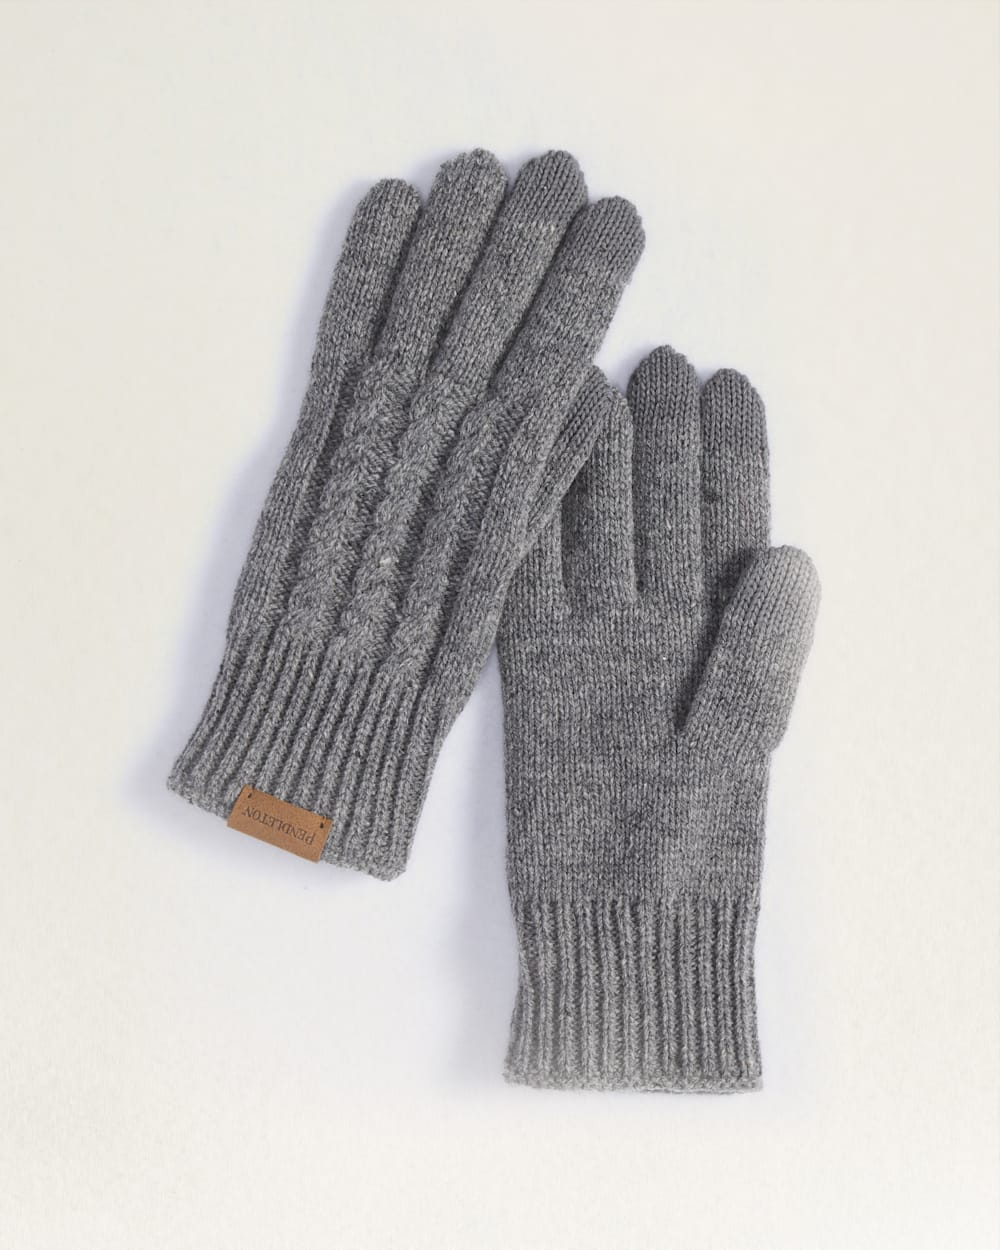 Stay Warm & Stylish with Cable Knit Texting Glove | Pendleton